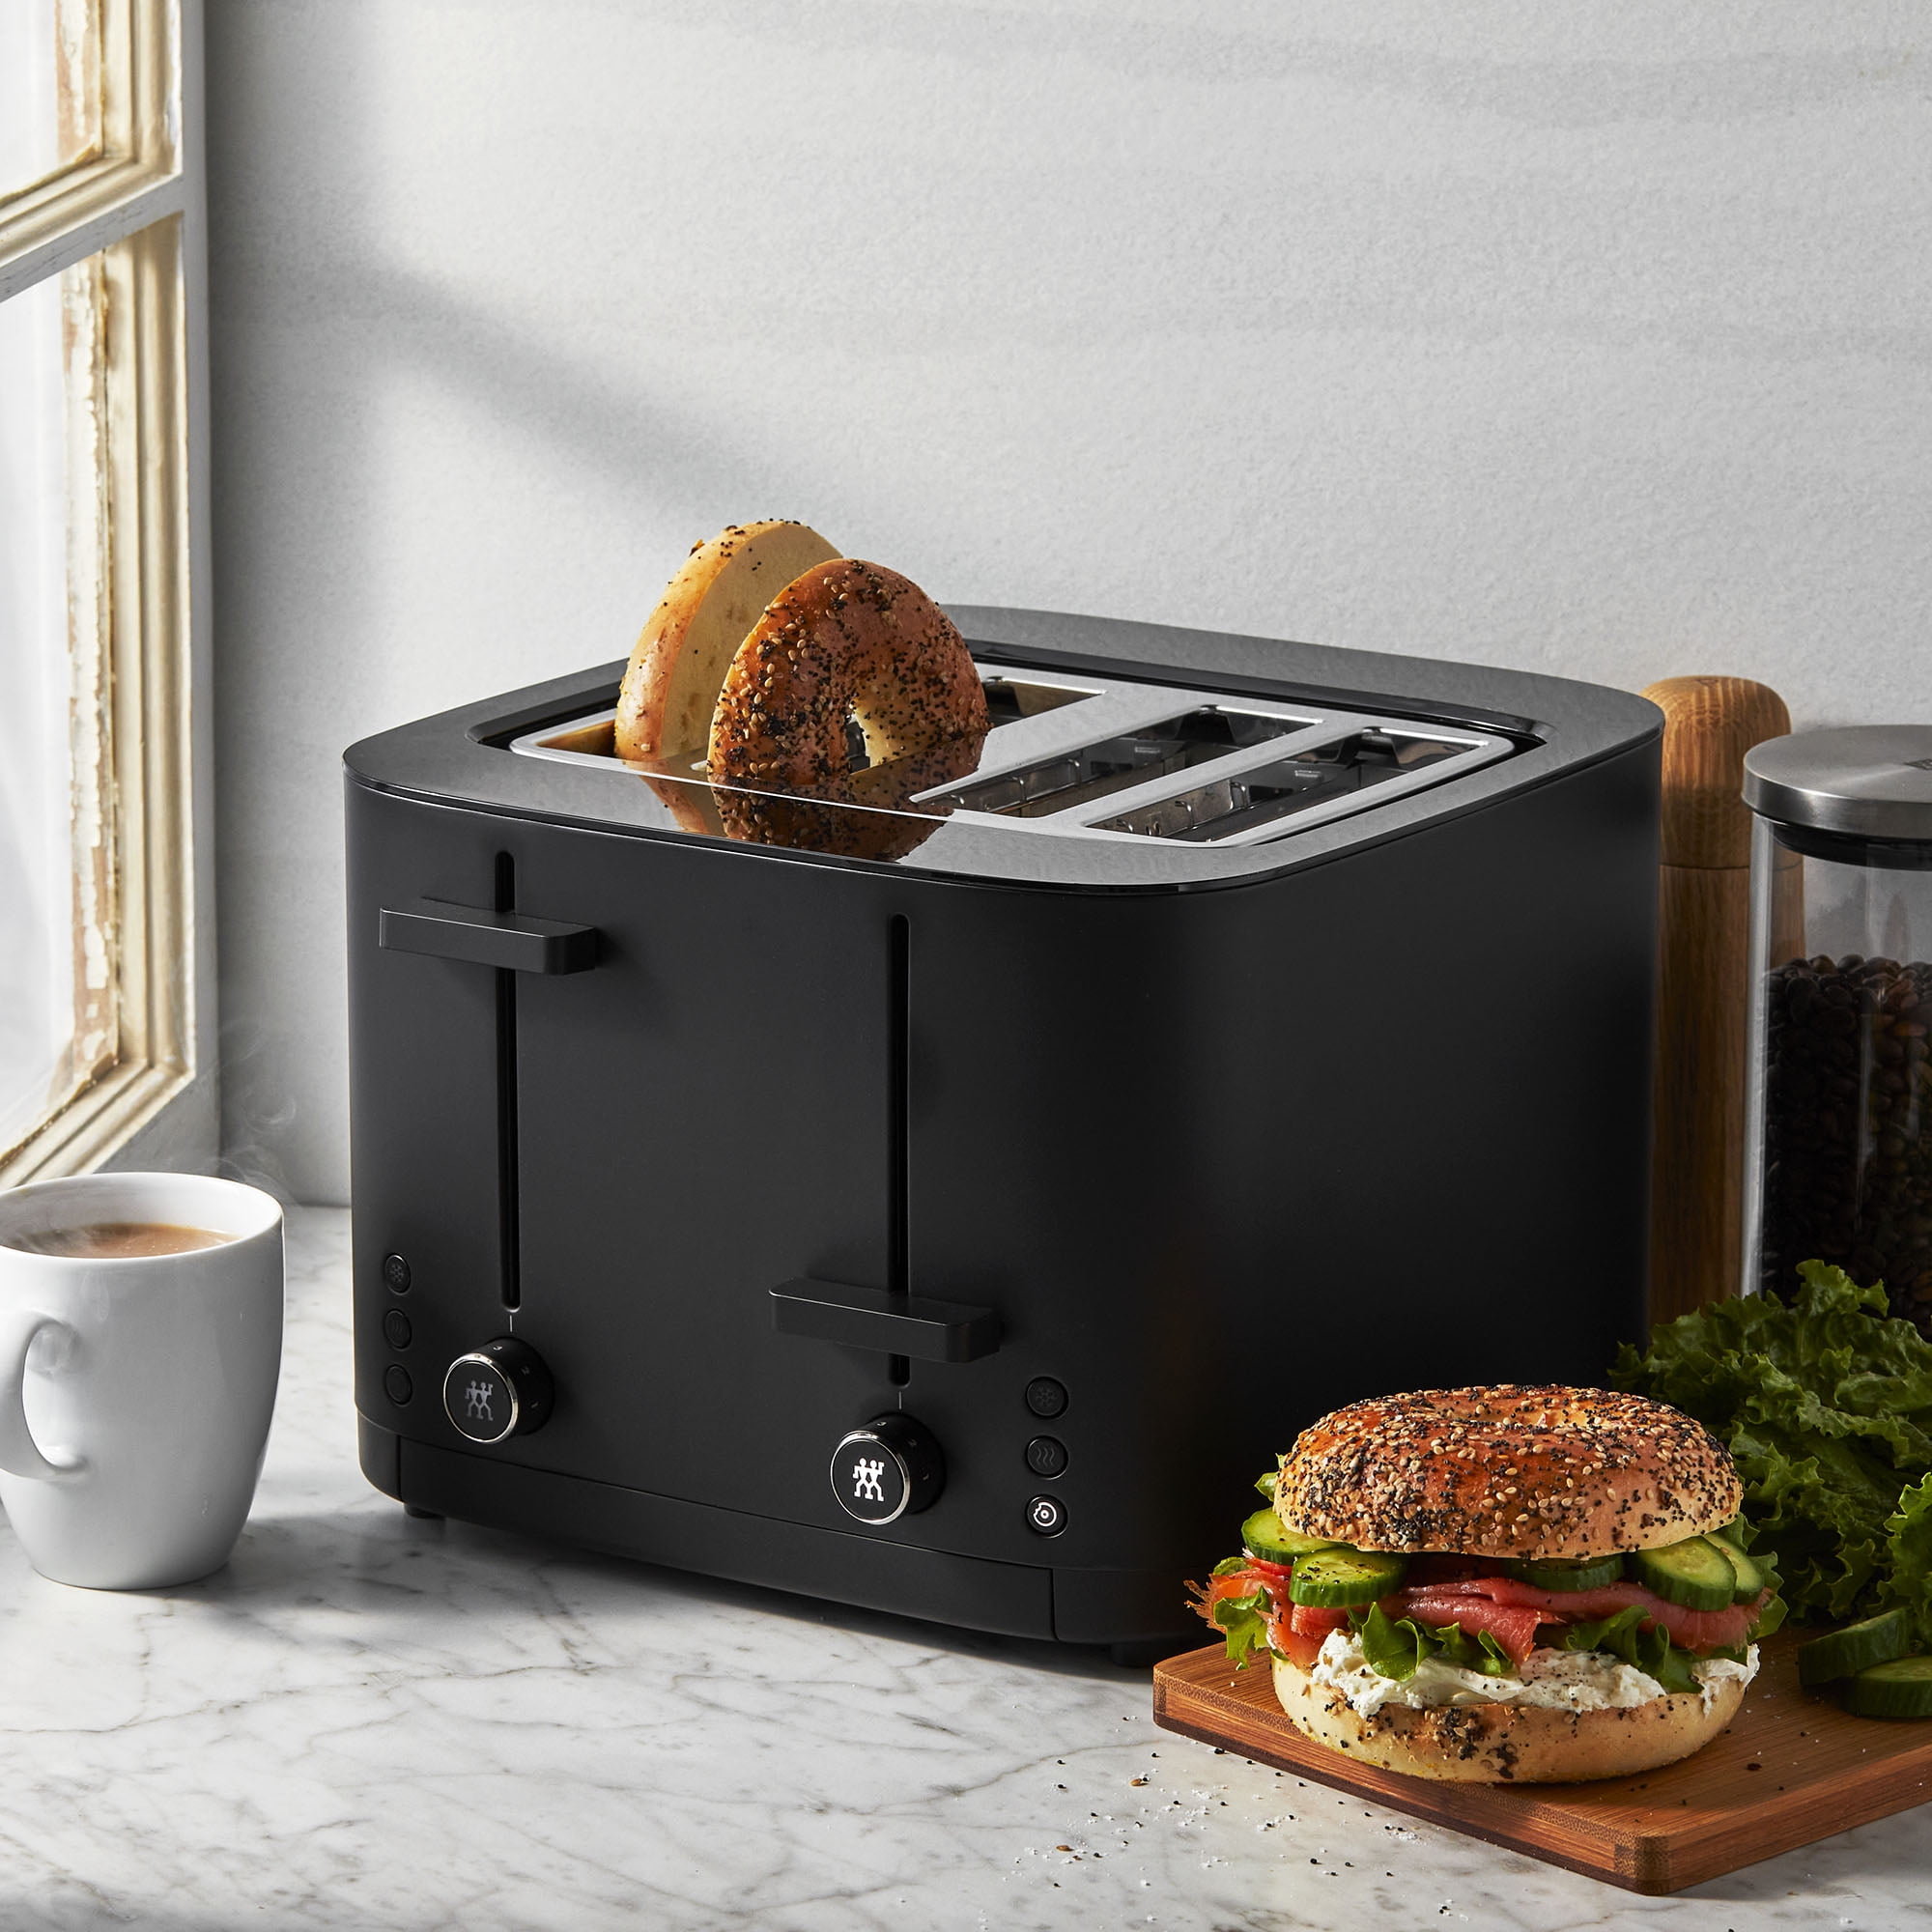  ZWILLING Enfinigy 4 Slice Toaster with Extra Wide 1.5 Slots  for Bagels, 7 Toast Settings, Even Toasting, Reheat, Cancel, Defrost,  Silver: Home & Kitchen